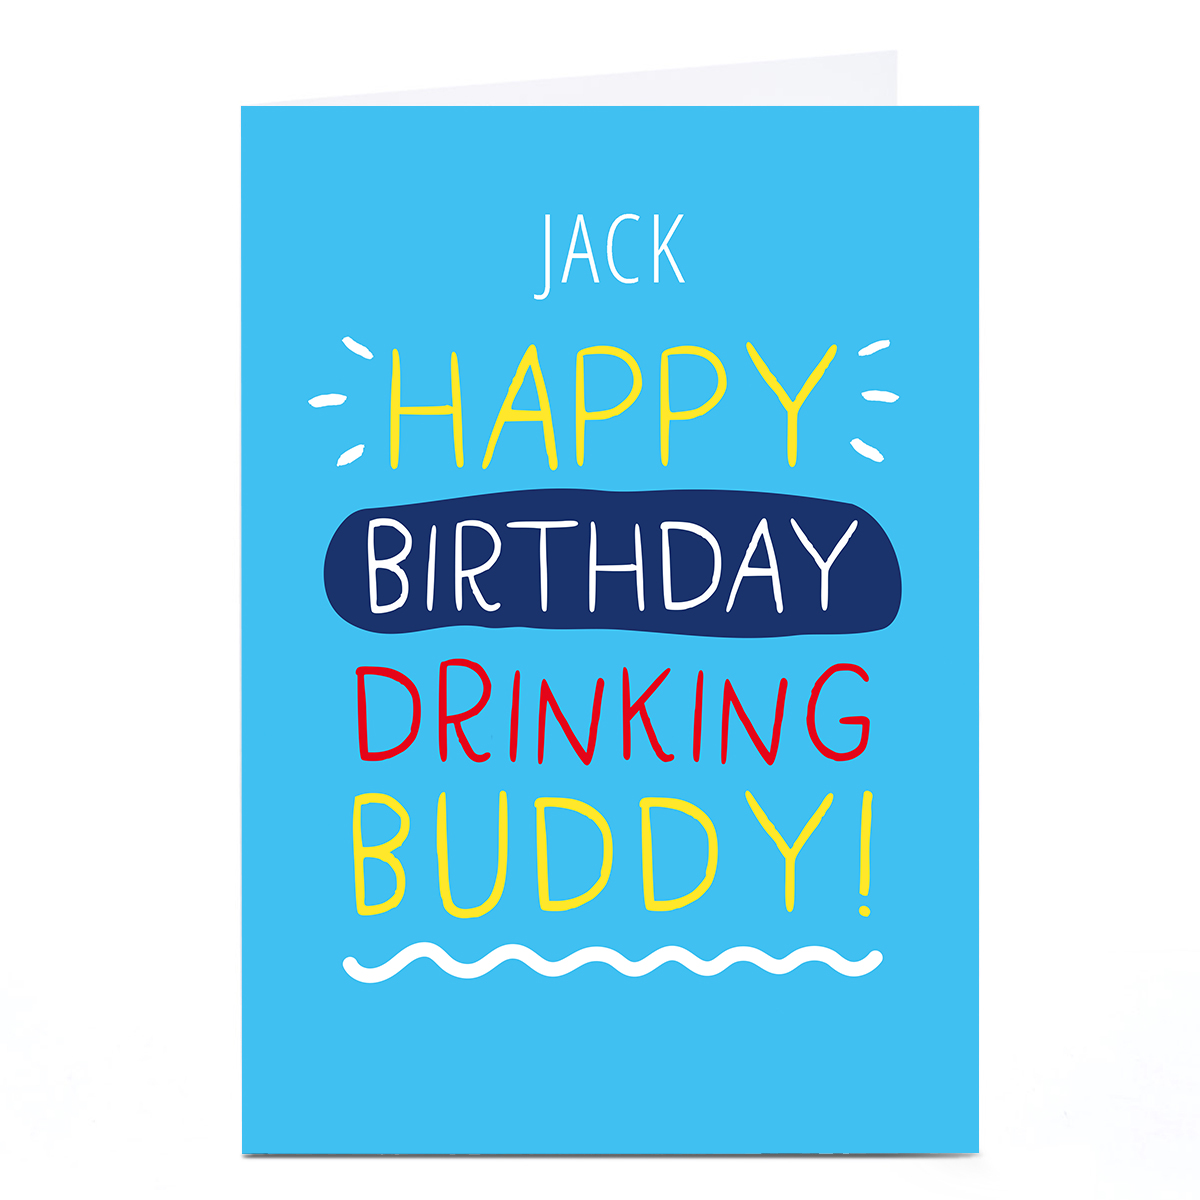 Personalised Smiley Happy People Birthday Card - Drinking Buddy